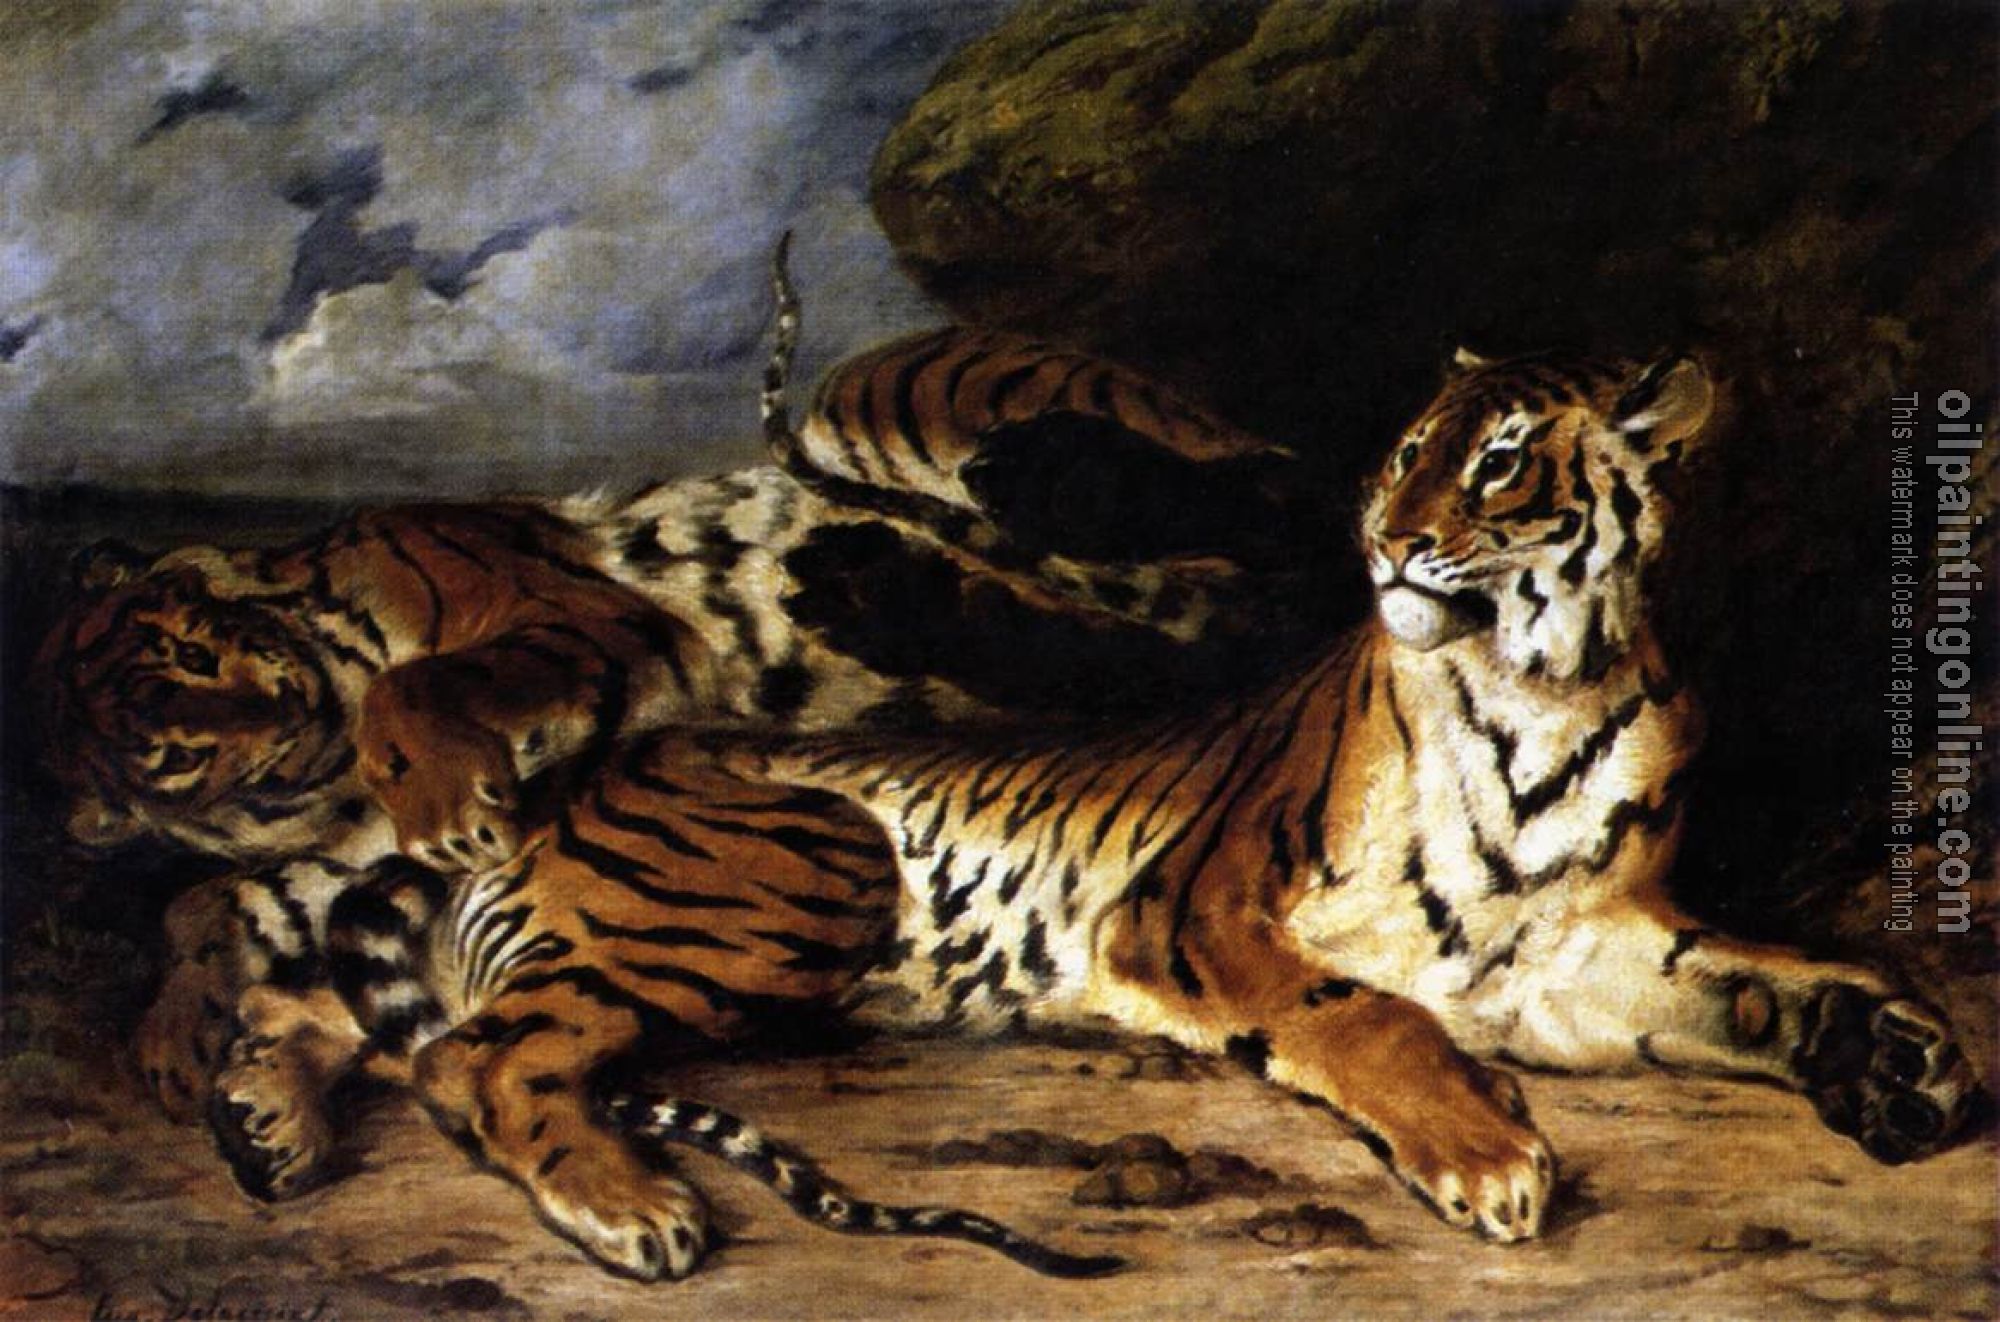 Delacroix, Eugene - A Young Tiger Playing with its Mother